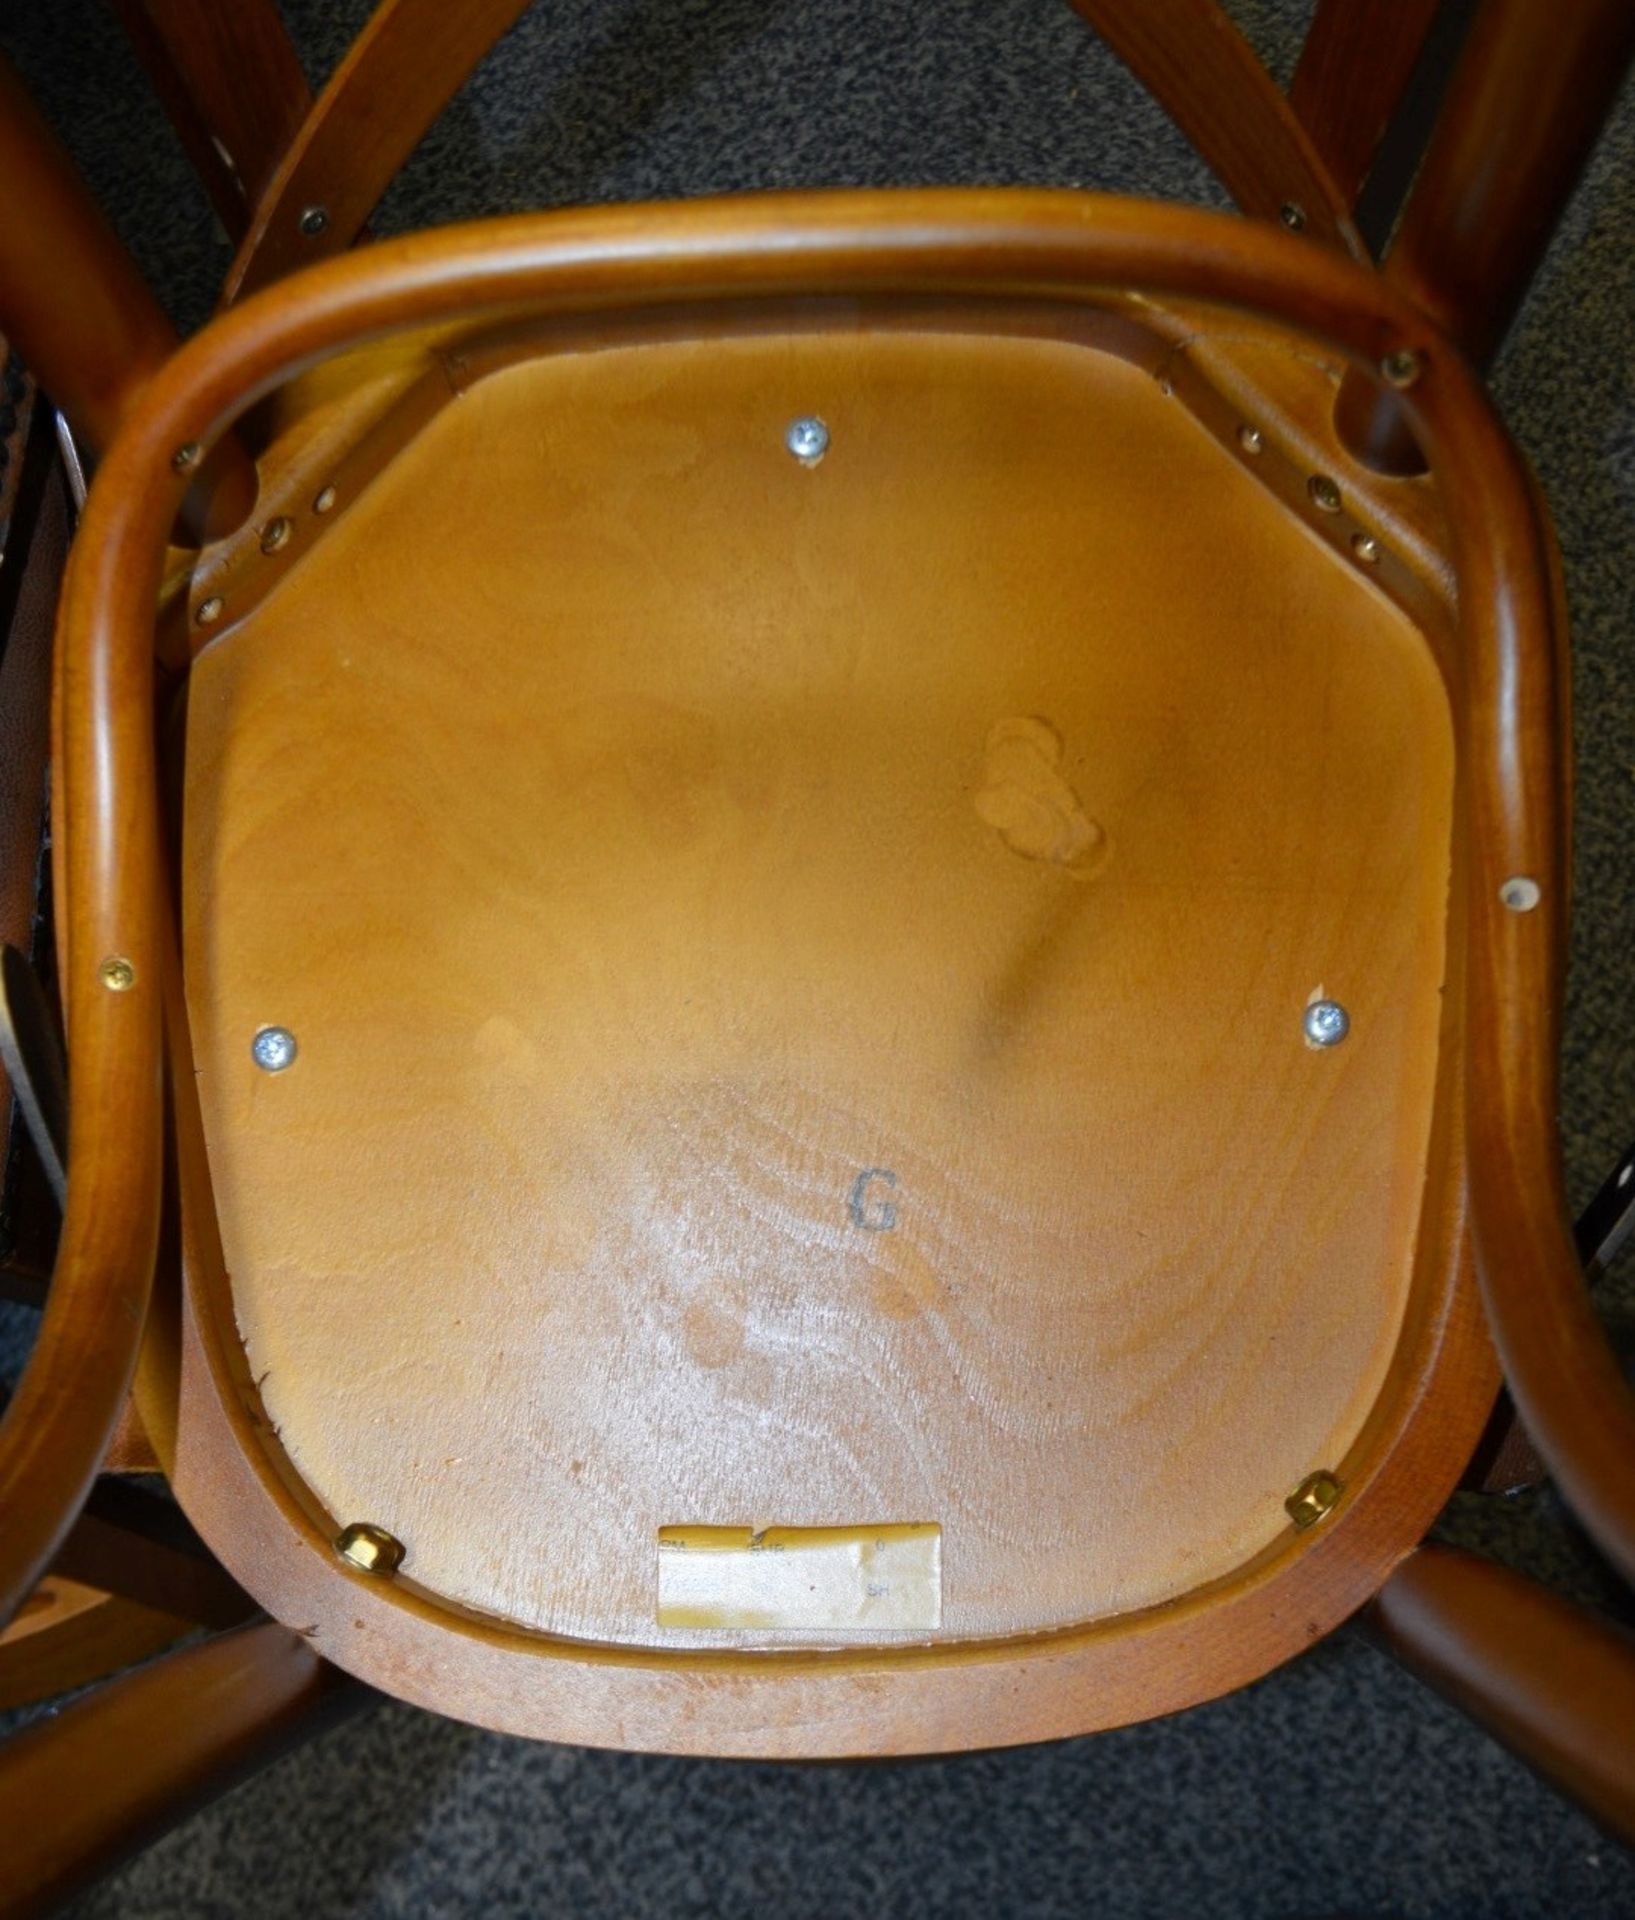 4 x Assorted Cross-Back Dining Chairs - Dimensions: W43 x D40 x H82 x Seat 46cm - Used - Ref614 - - Image 4 of 7